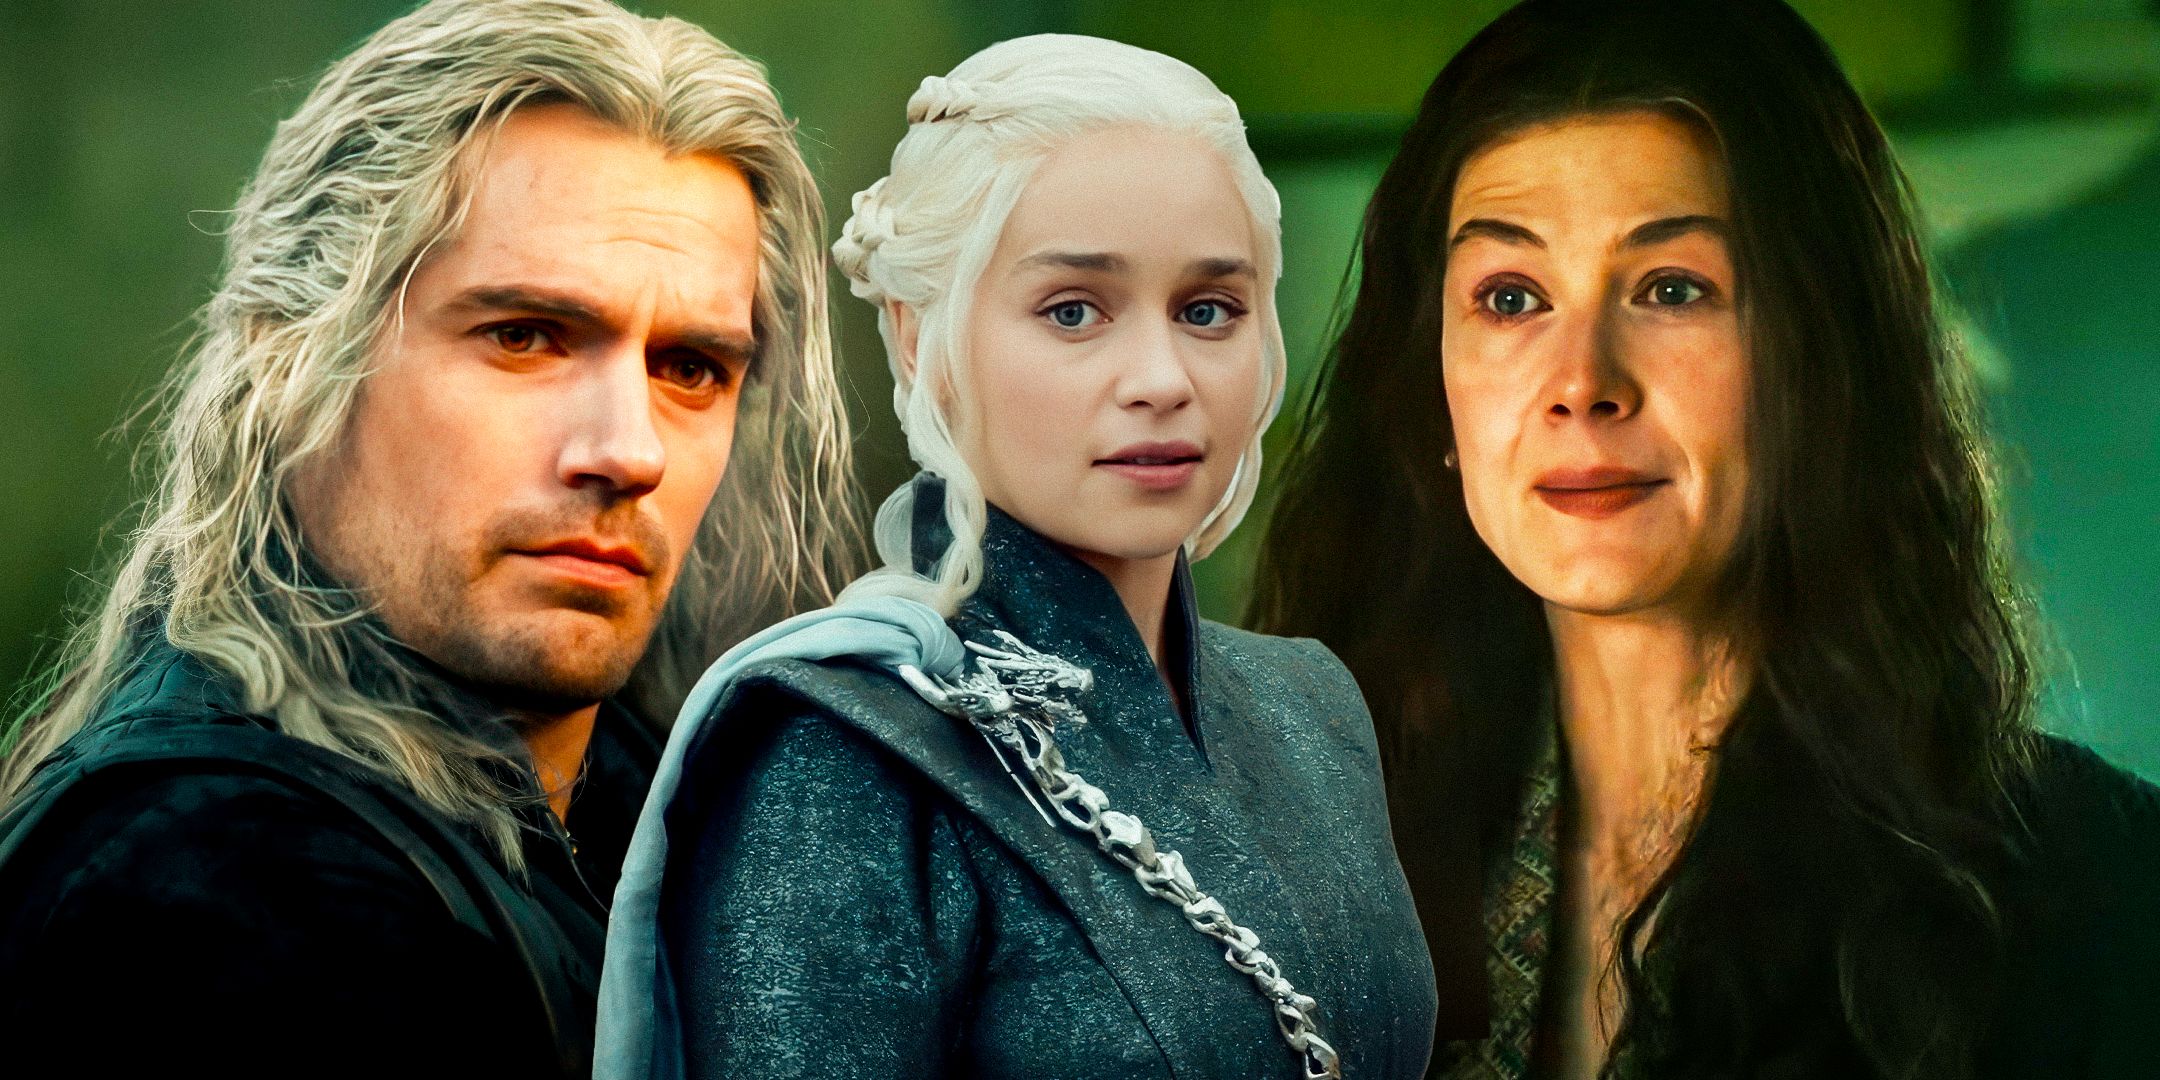 (Henry Cavill as Geralt of Rivia) from The Witcher, (Rosamund Pike as Moiraine Damodred) from The Wheel of Time and (Emilia Clarke as Daenerys Targaryen) from Game of Thrones